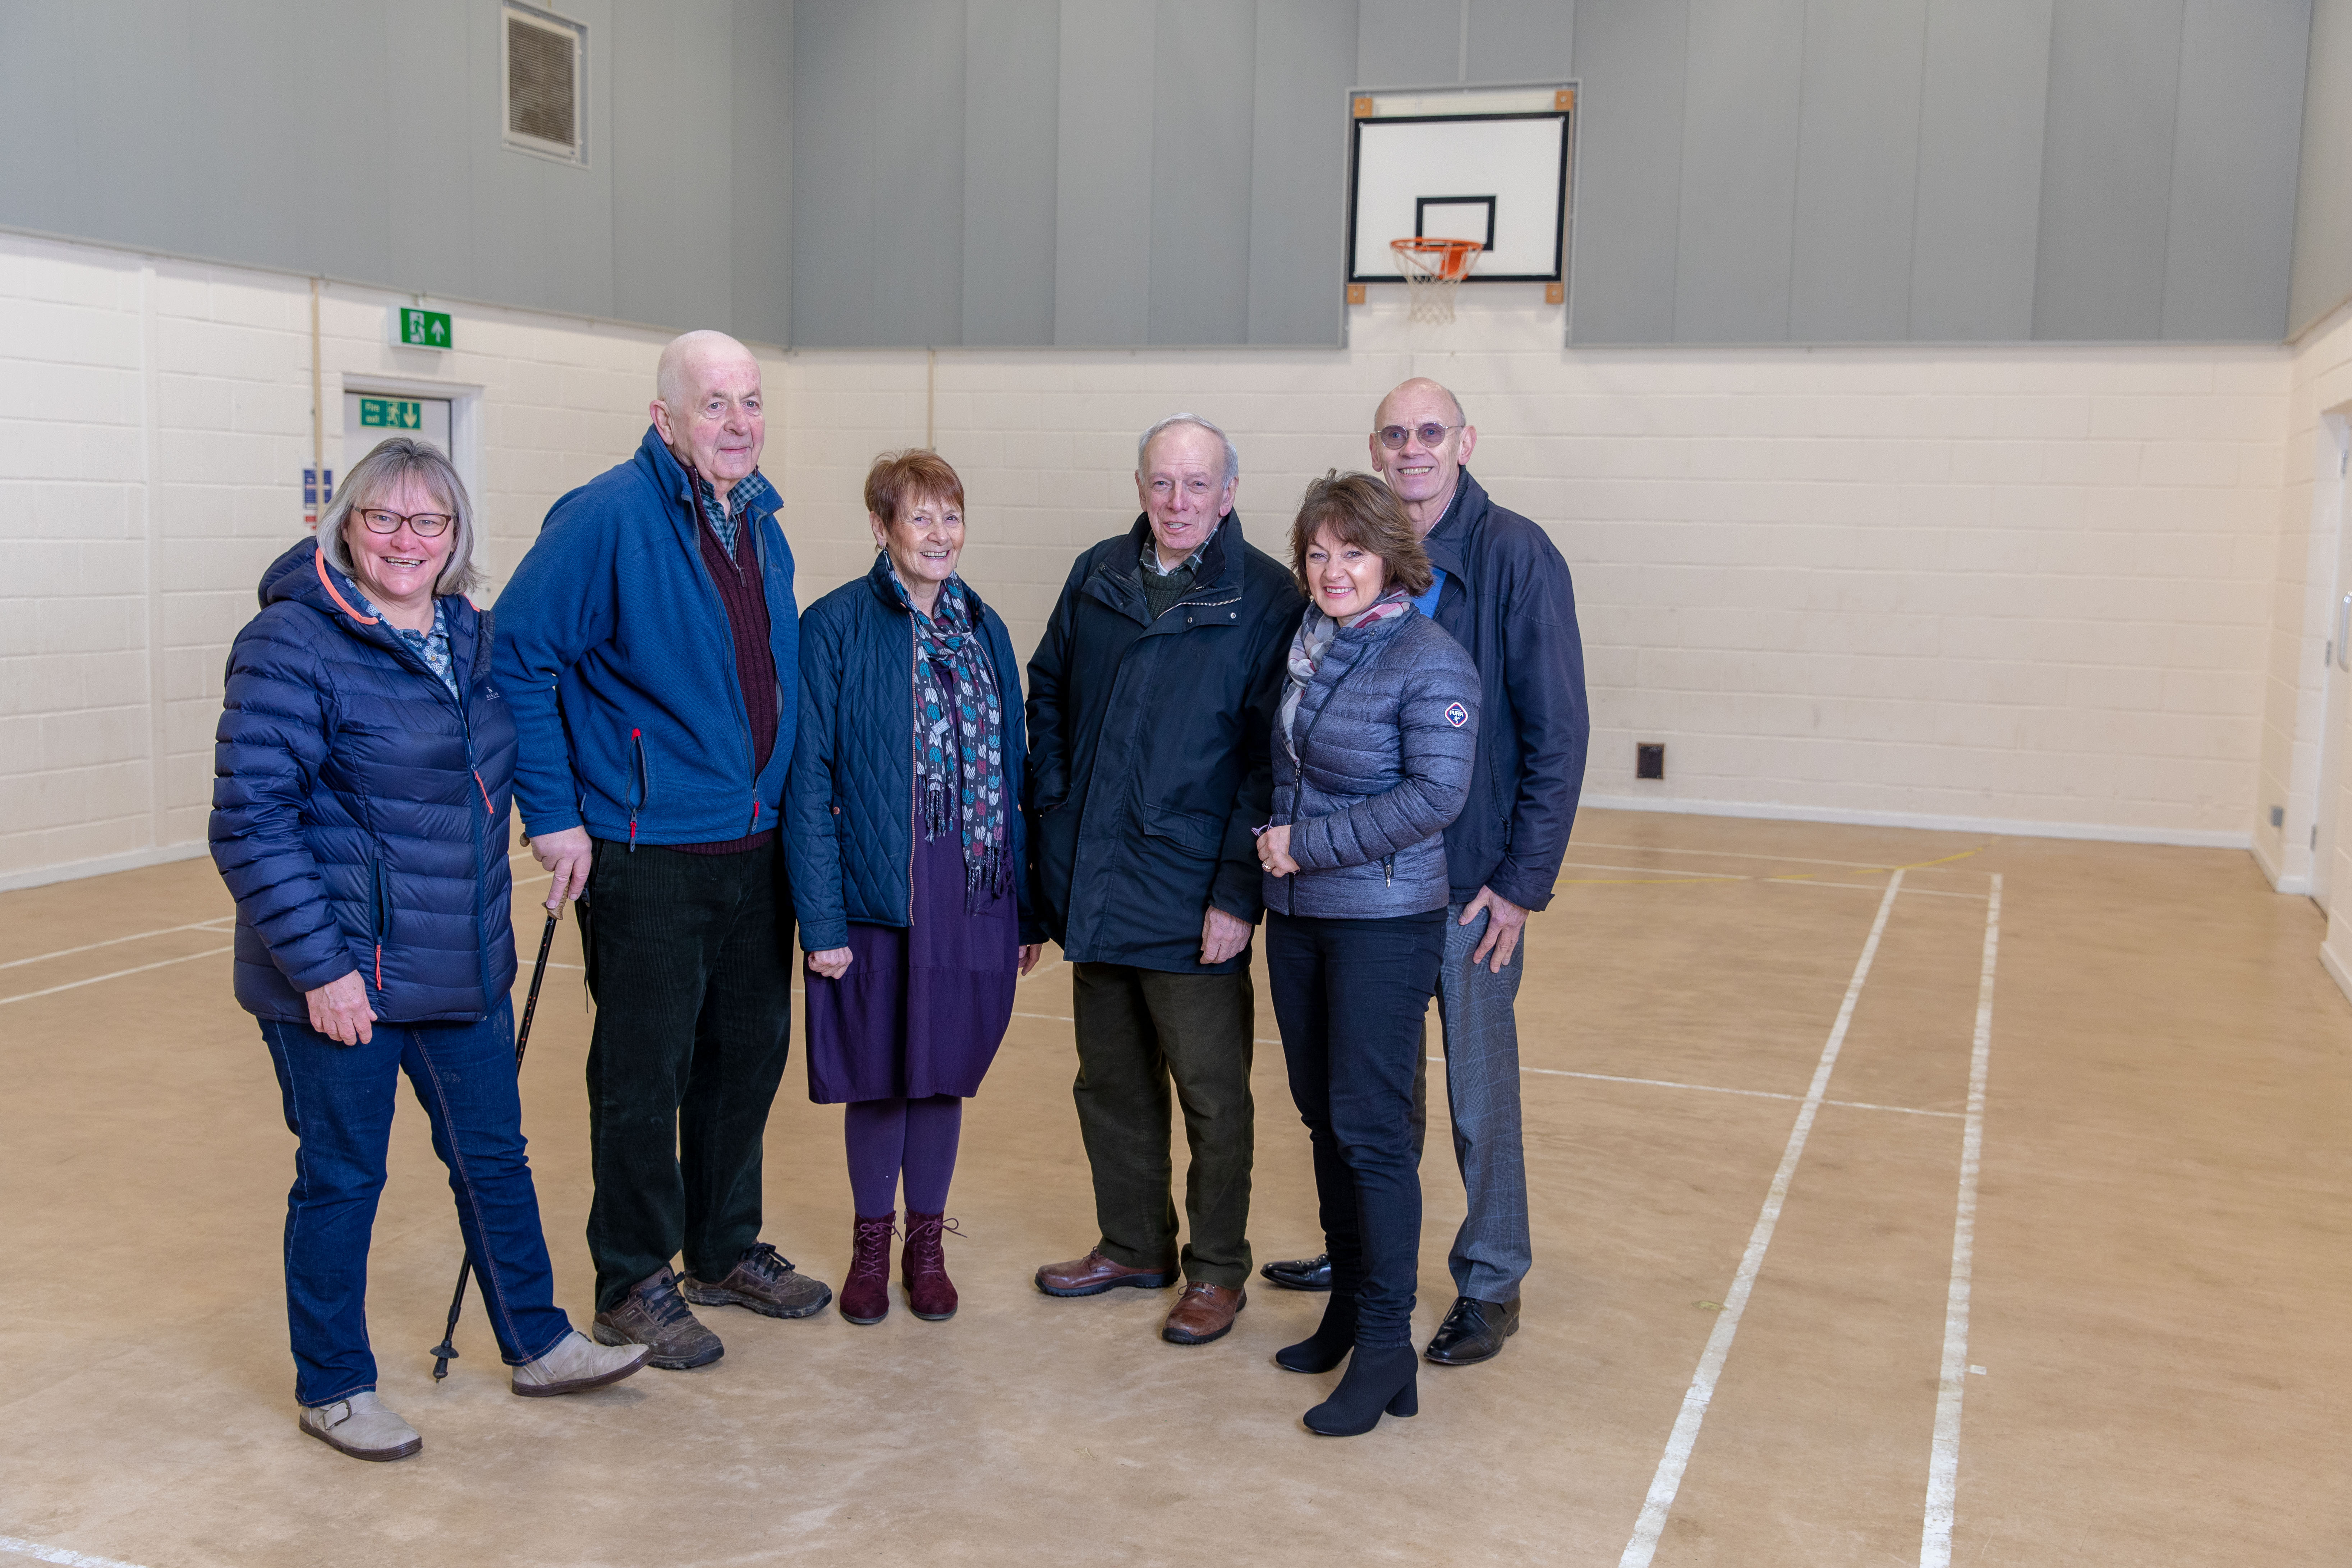 Margaret Cumming, David Lord, Hilary Cook, Peter Cook, Peter Daniels and Jill Saunders in the main hall